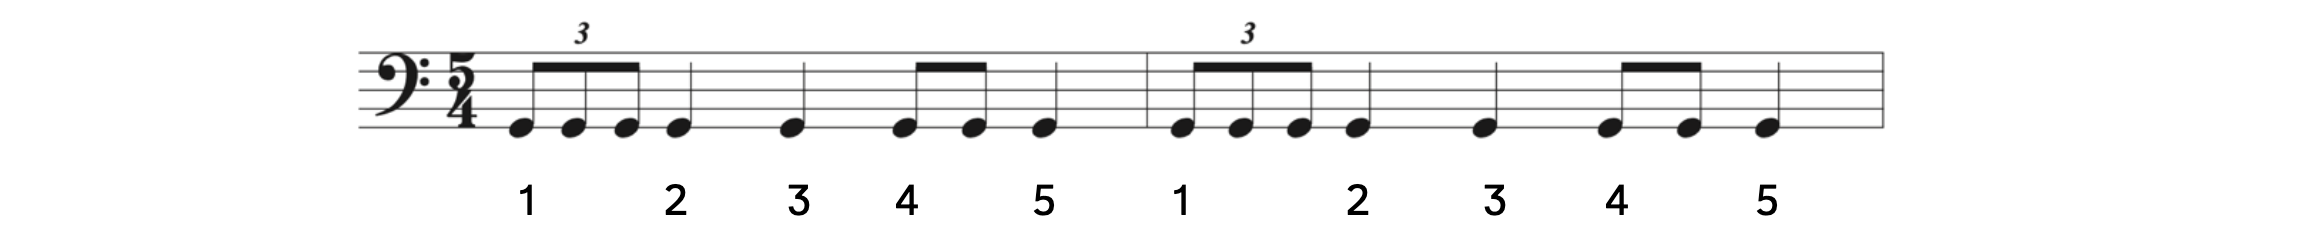 Irregular meter: Holst, The Planets, op. 32, "Mars, the Bringer of War". The time signature is 5-4.